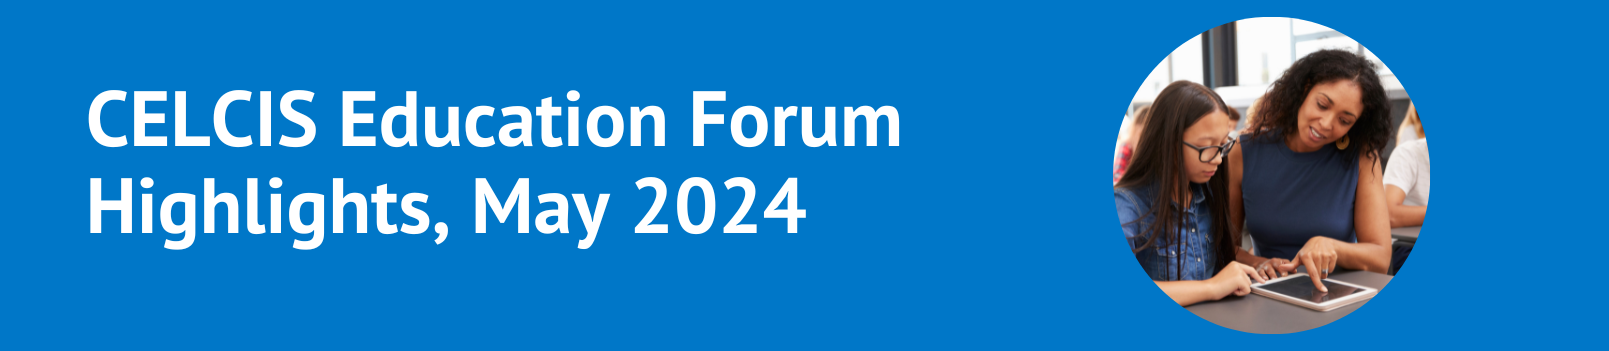 CELCIS Education Forum Highlights, May 2024